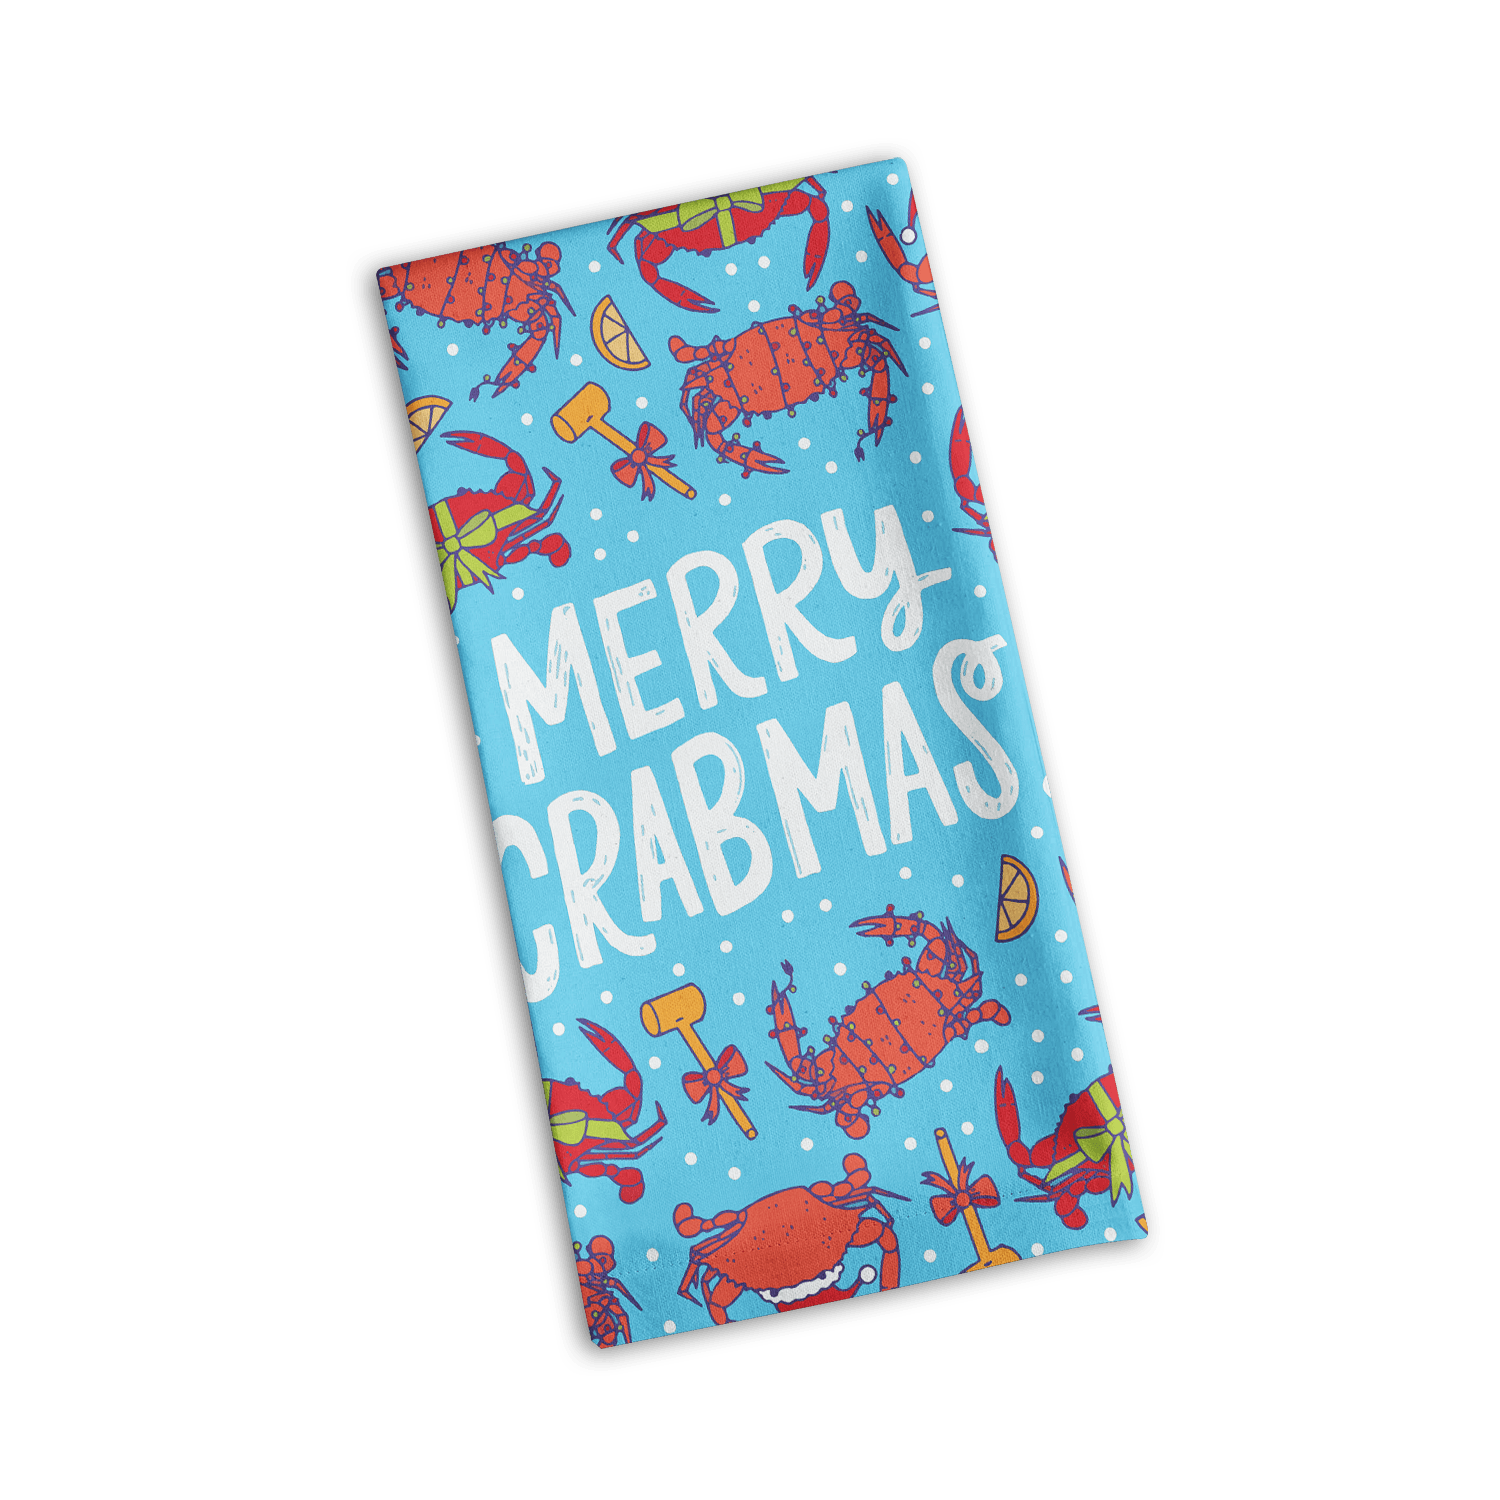 Merry Crabmas / Kitchen Towel - Route One Apparel